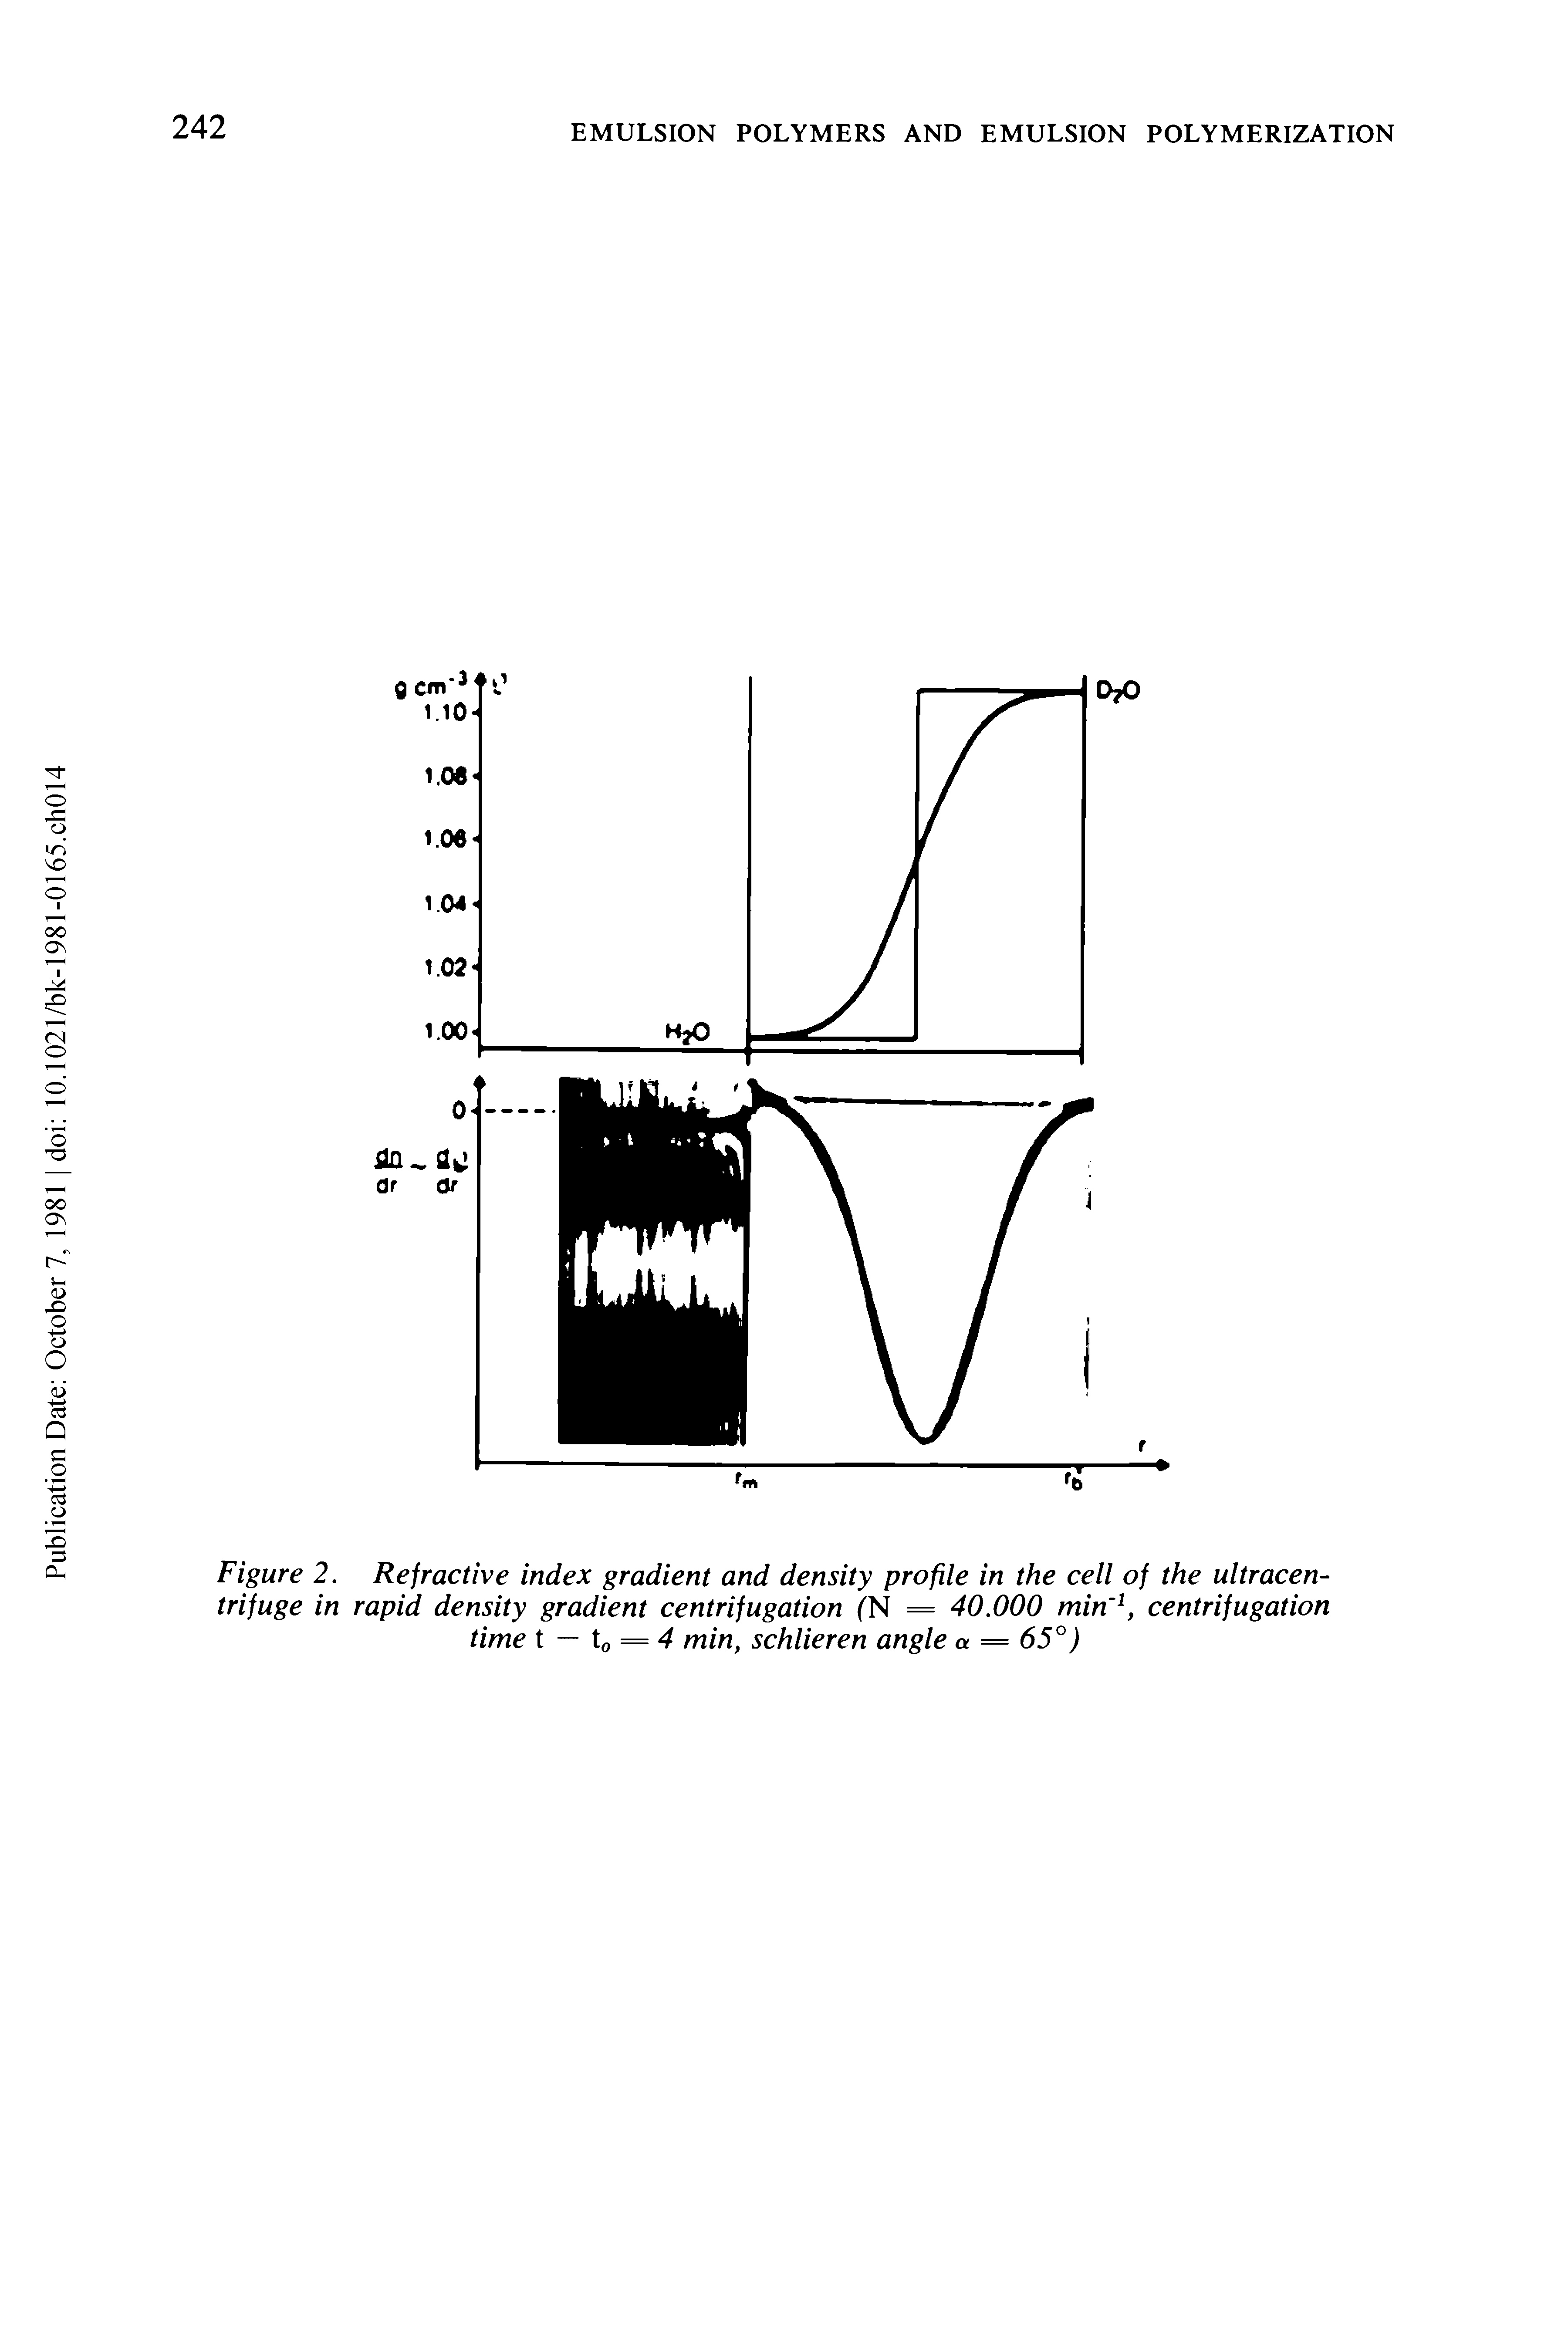 Figure 2. Refractive index gradient and density profile in the cell of the ultracentrifuge in rapid density gradient centrifugation (N = 40.000 min1, centrifugation time t — to = 4 min, schlieren angle a = 65°)...